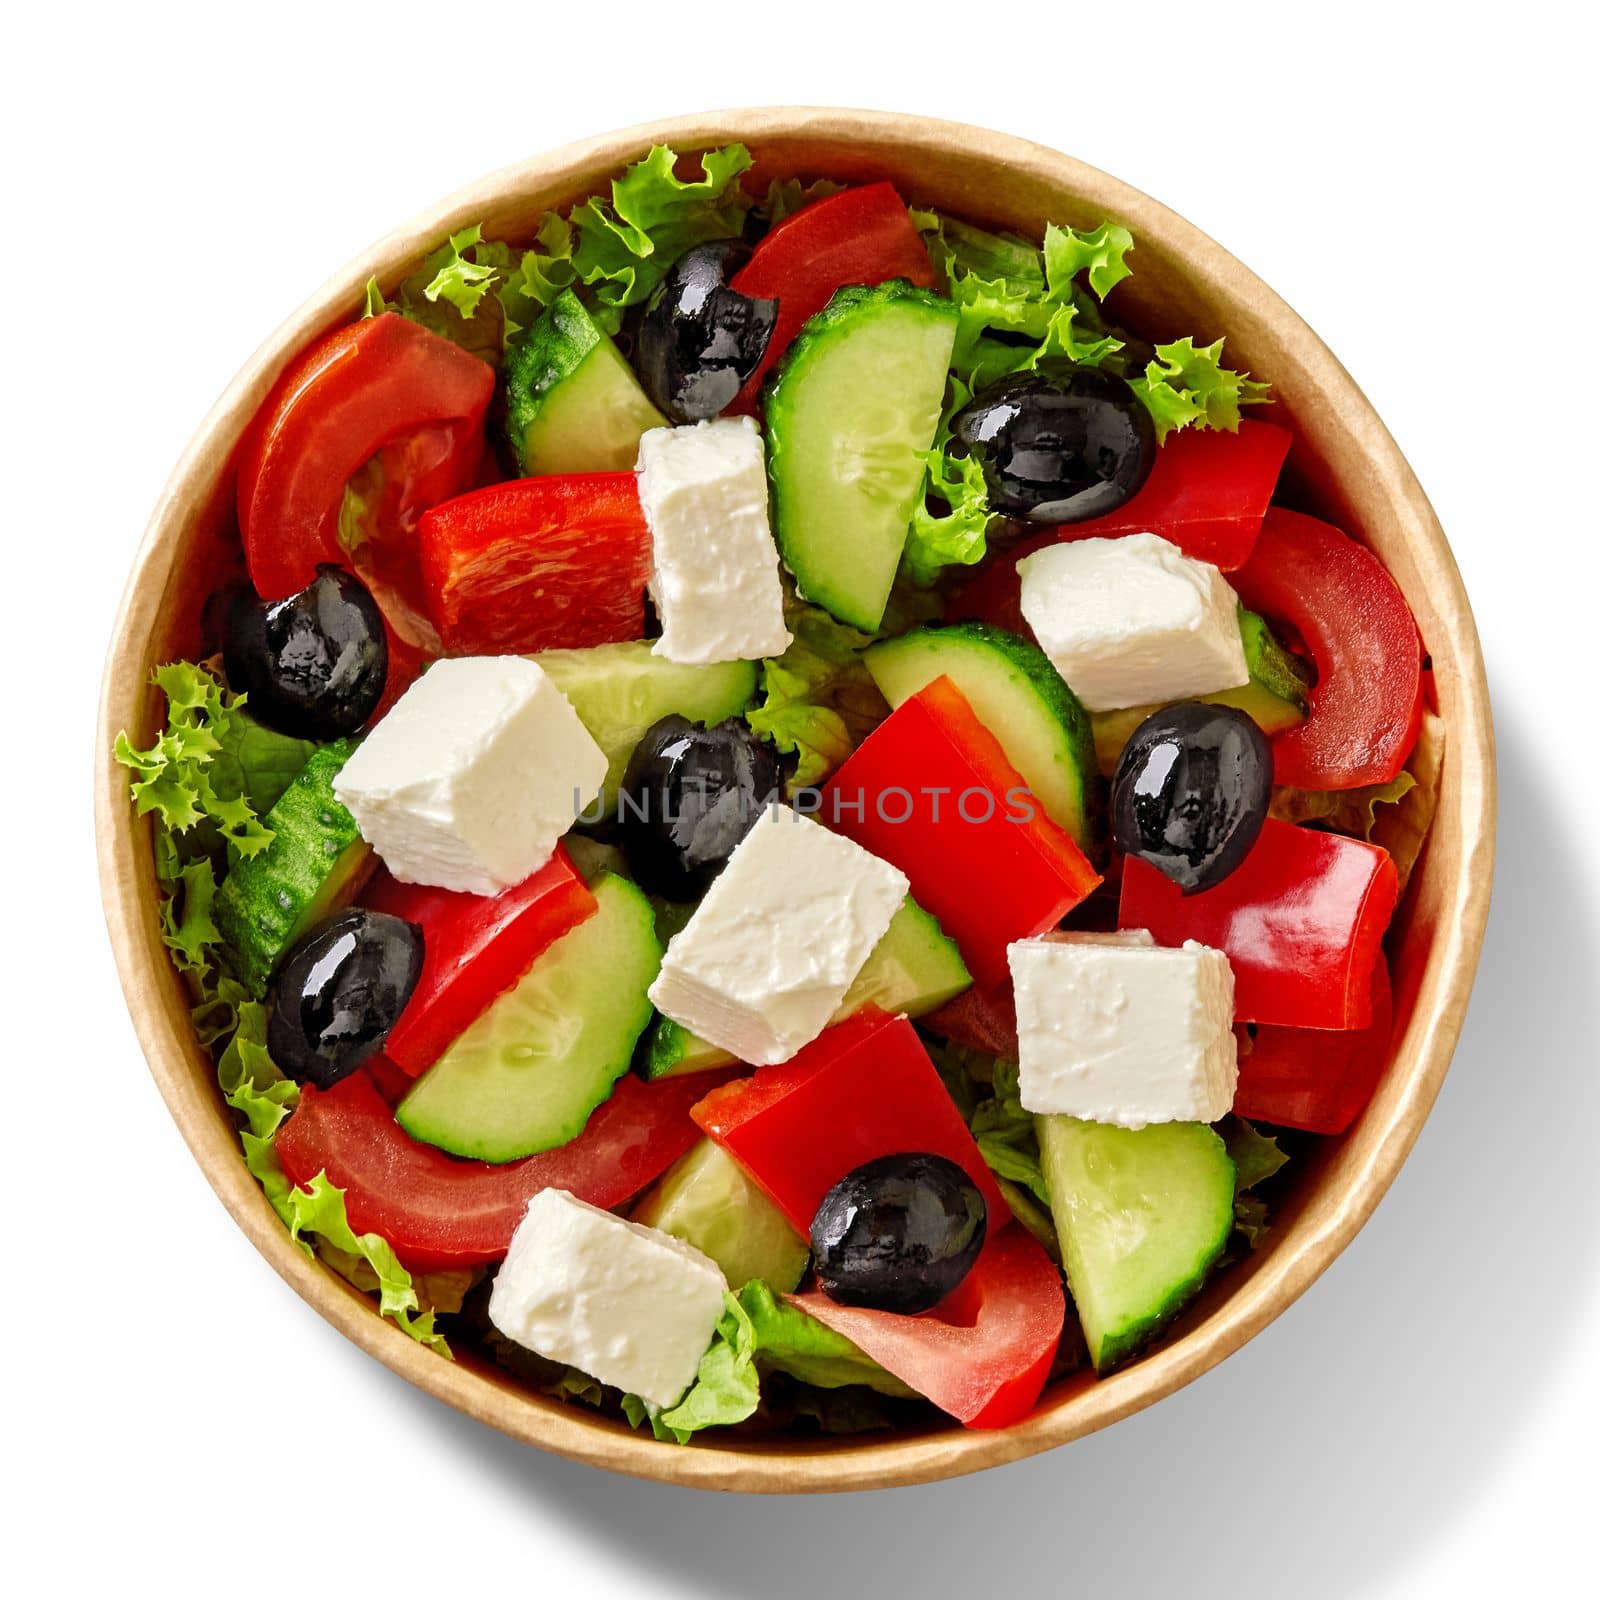 Greek salad with tomatoes, sweet peppers, cucumbers, feta and black olives served in cardboard bowl by nazarovsergey